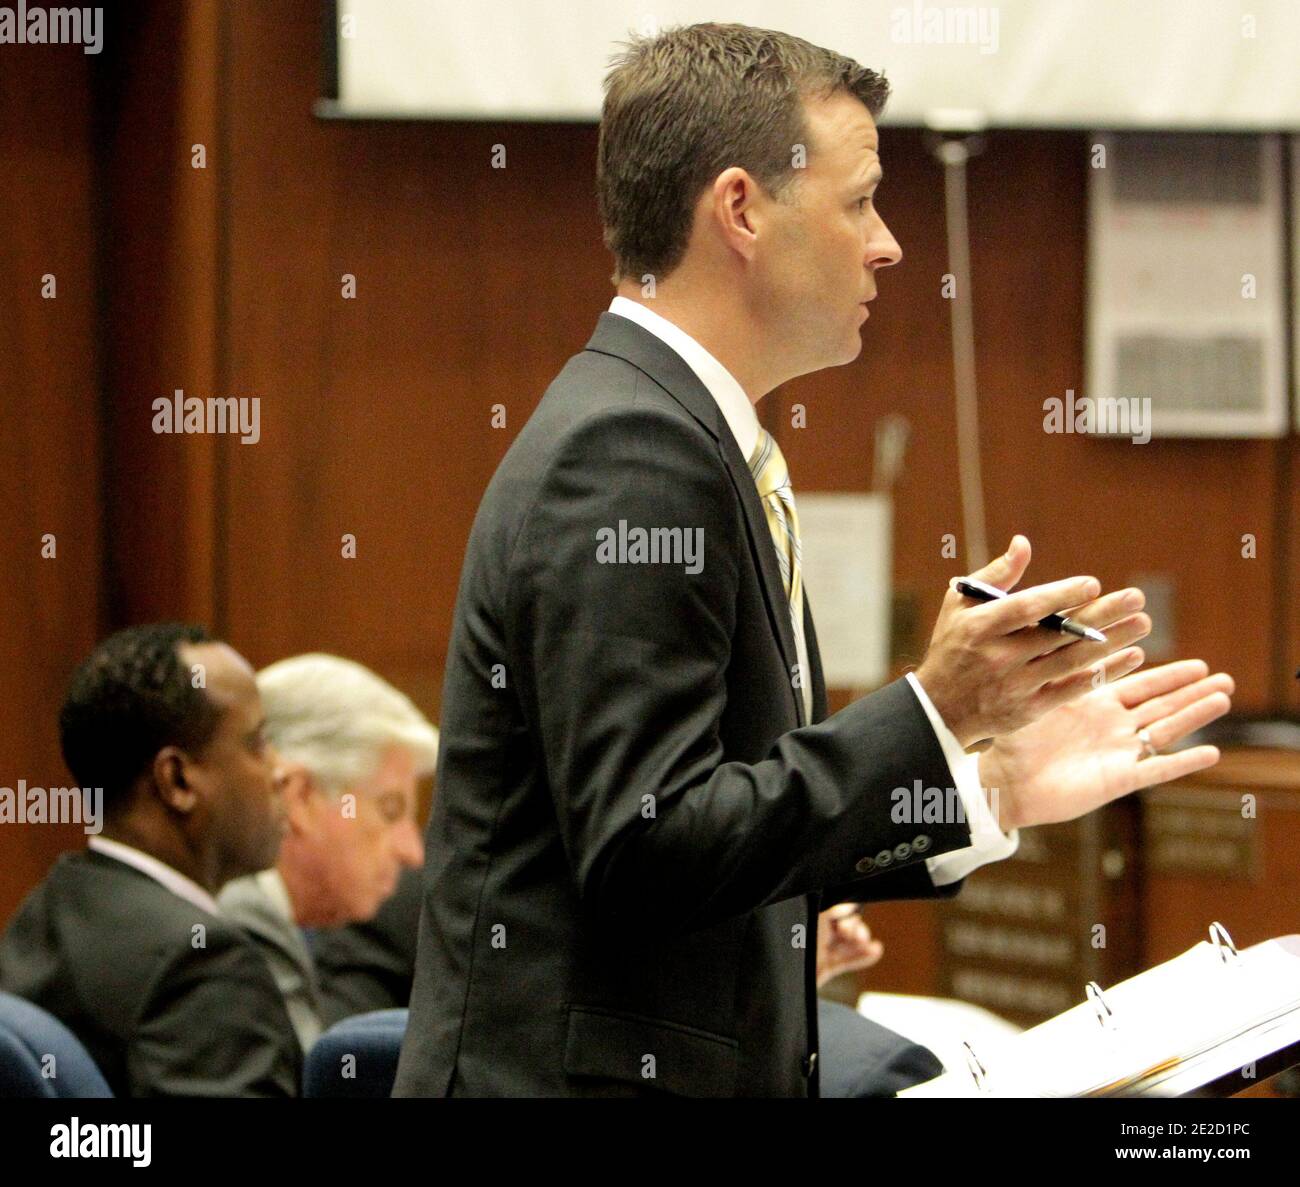 Deputy District Attorney David Walgren questions anesthesiology expert Dr. Steven Shafer during Dr. Conrad Murray's involuntary manslaughter trial in downtown Los Angeles on October 19, 2011. Murray has pleaded not guilty and faces four years in prison and the loss of his medical license if convicted of involuntary manslaughter in Michael Jackson's death. Photo by Reed Saxon/Pool/ABACAPRESS.COM Stock Photo